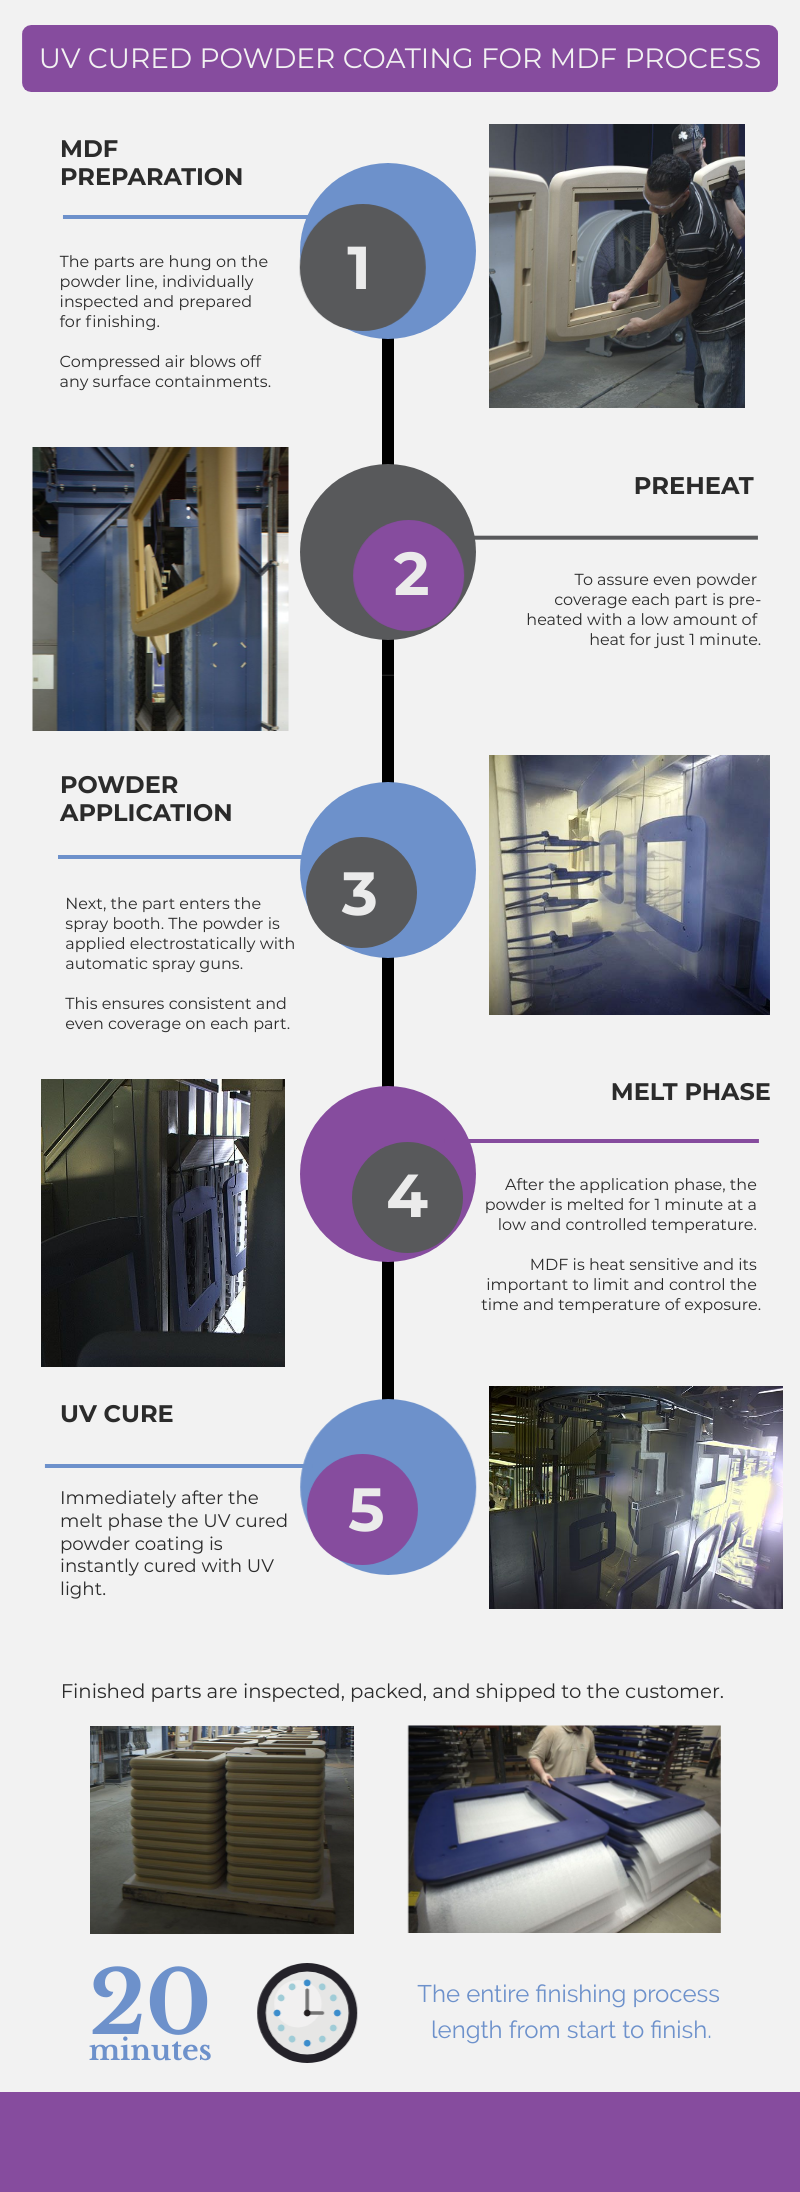 Infographic UV Cured Powder Coating for MDF Process